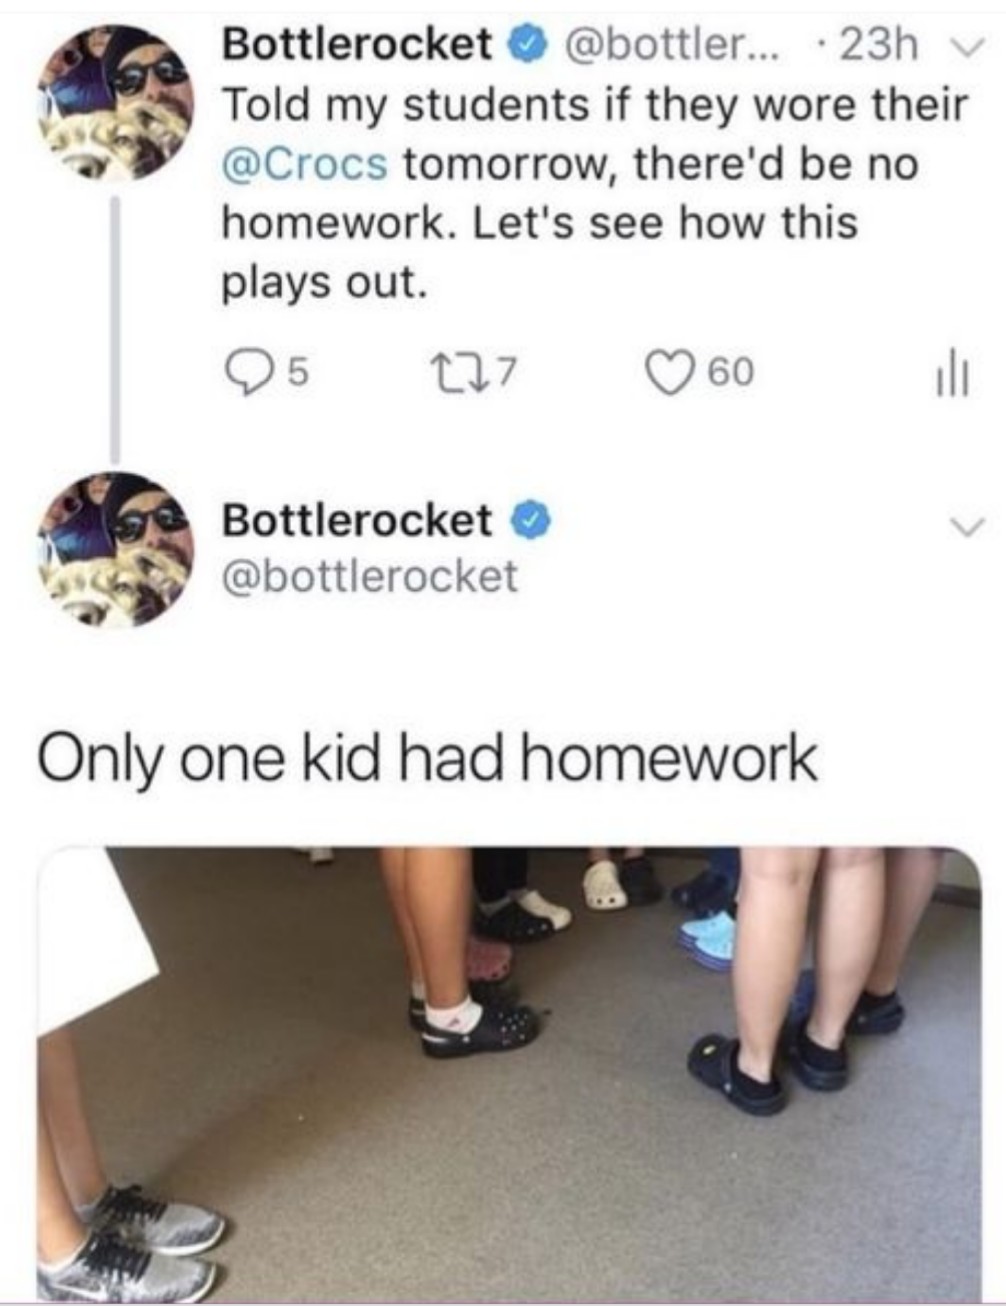 if you think the crocs are coming off during sex - Bottlerocket ... 23h v Told my students if they wore their tomorrow, there'd be no homework. Let's see how this plays out. 25 227 60 il Bottlerocket Only one kid had homework